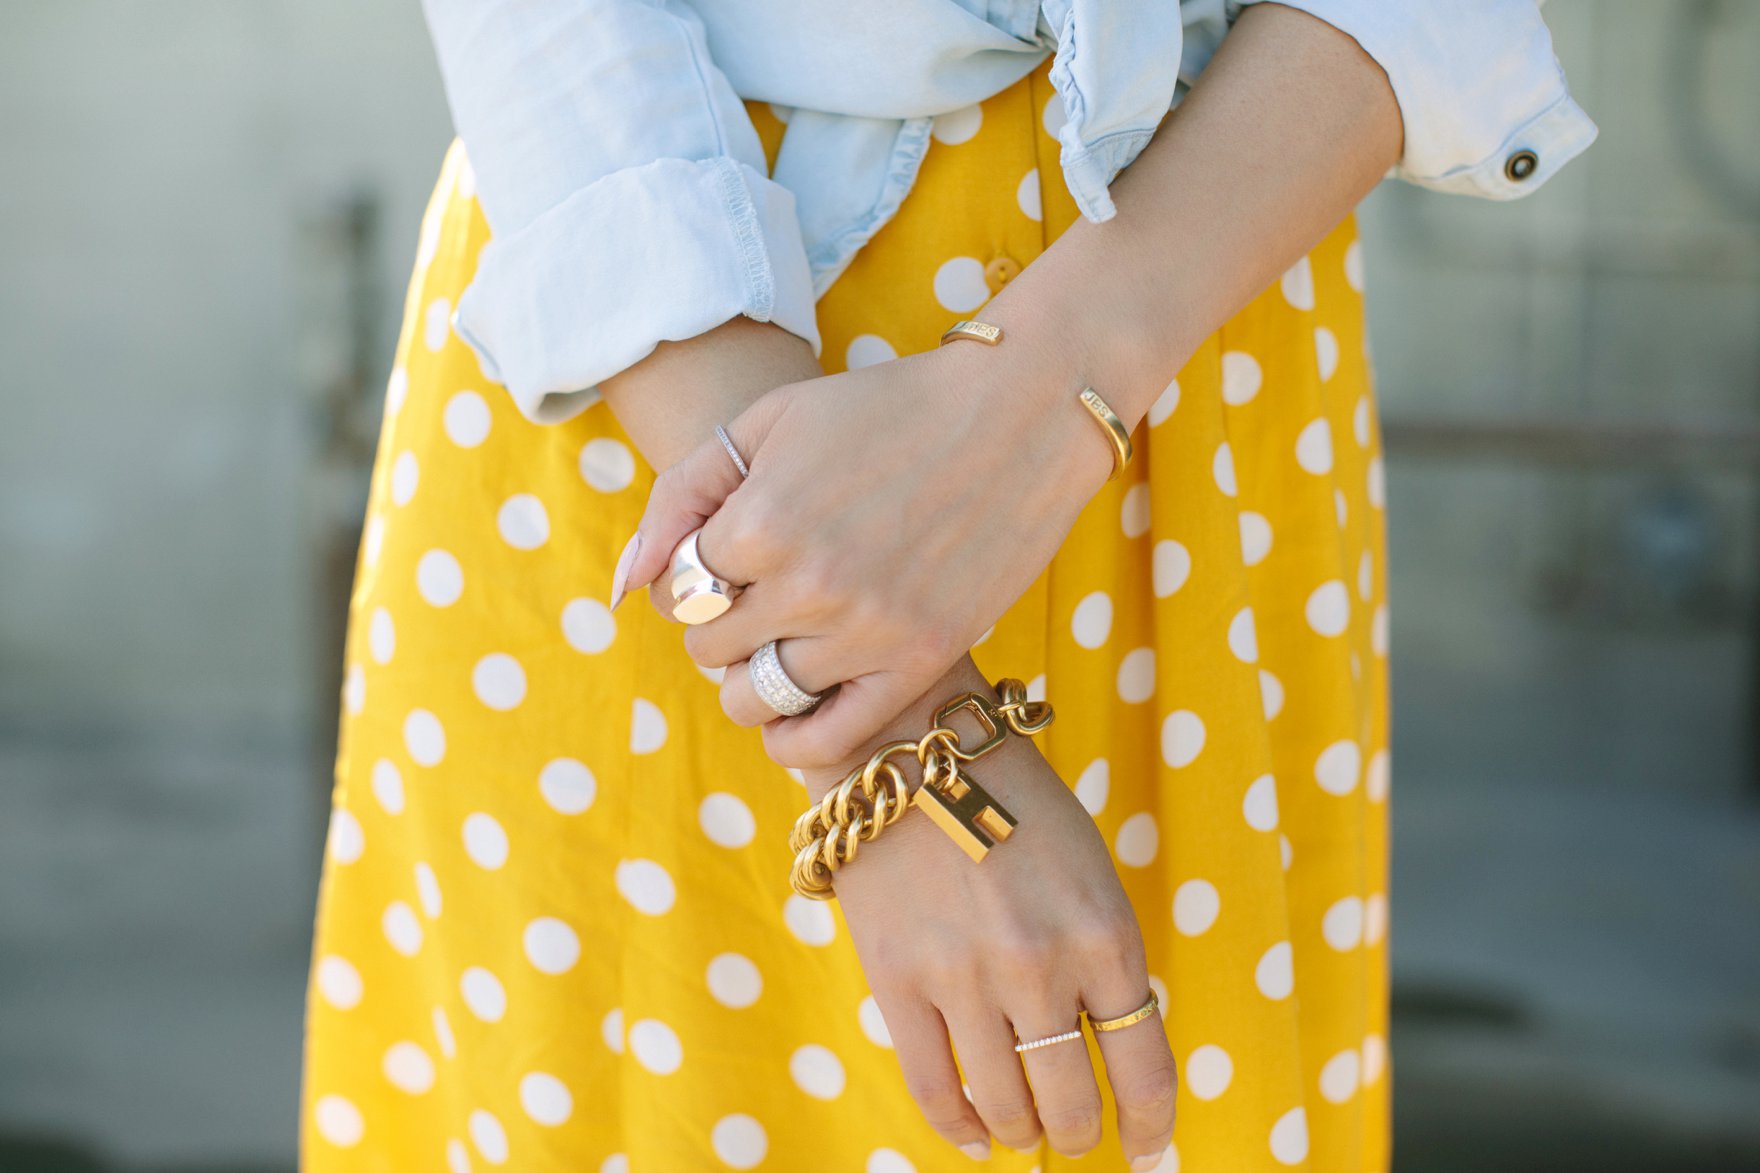 Yellow and white polka dot dress forever 21 paired with a chambray top featuring India hicks bracelet and other jewels